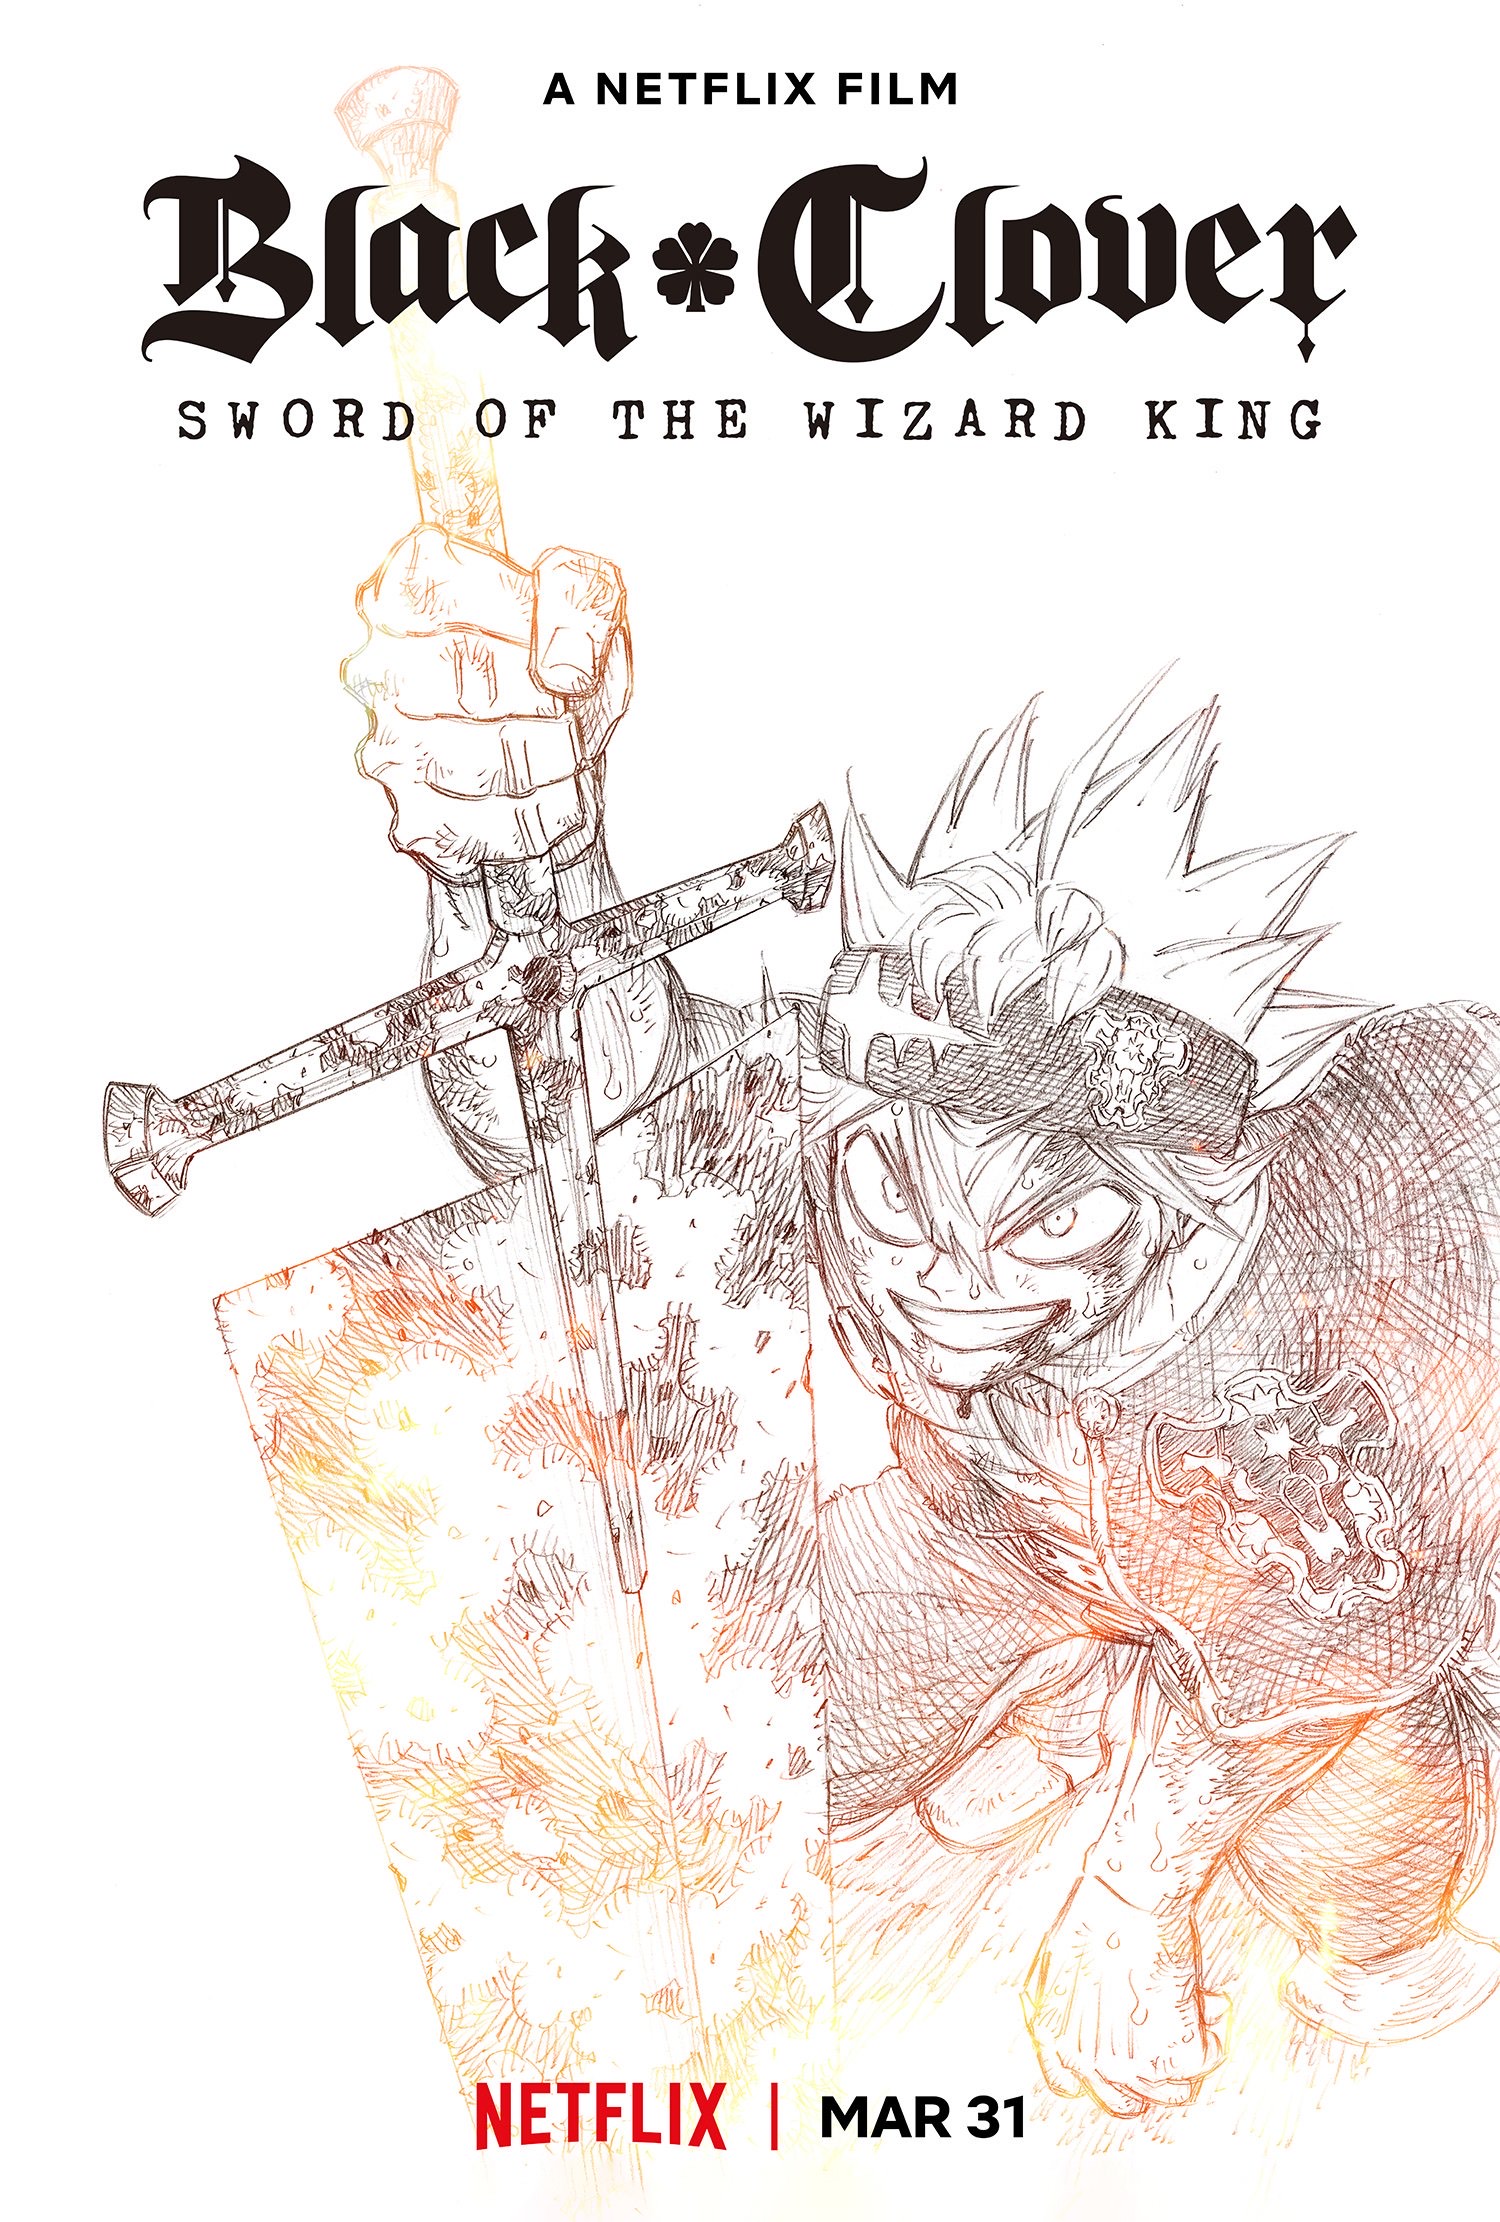 Black Clover Sword of the Wizard King Key Visual